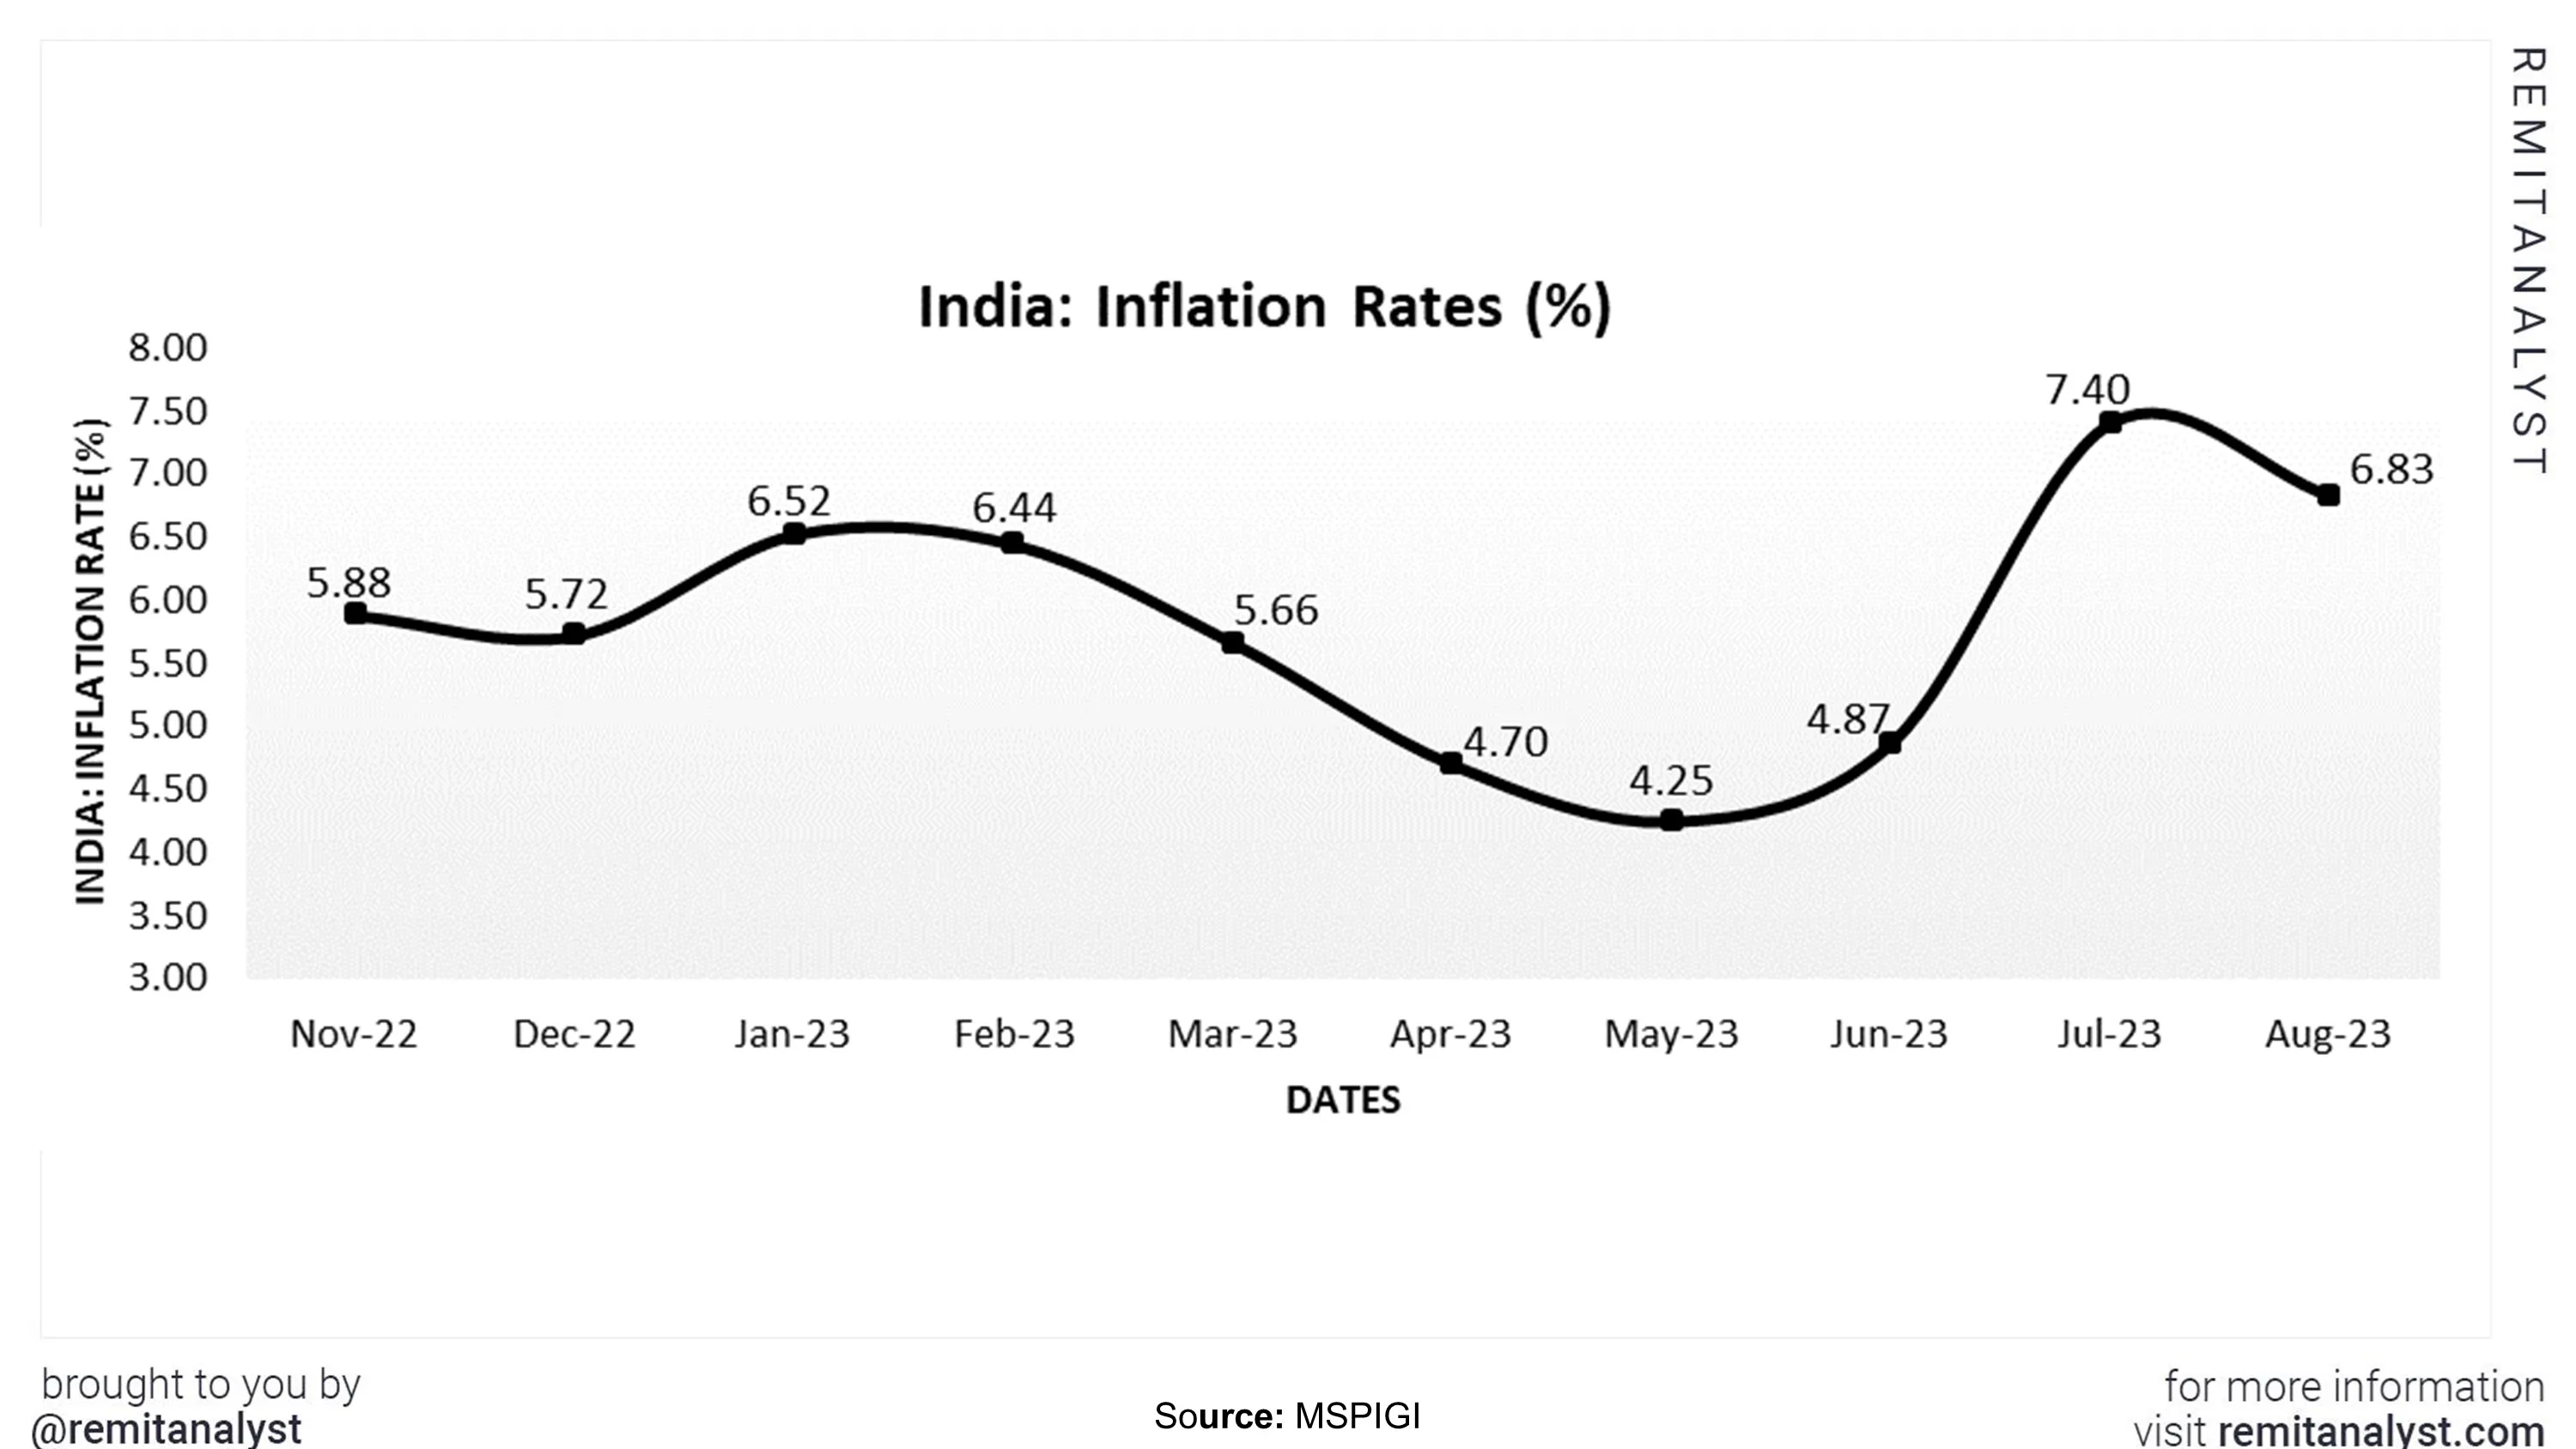 inflation-rates-in-india-from-nov-2022-to-aug-2023